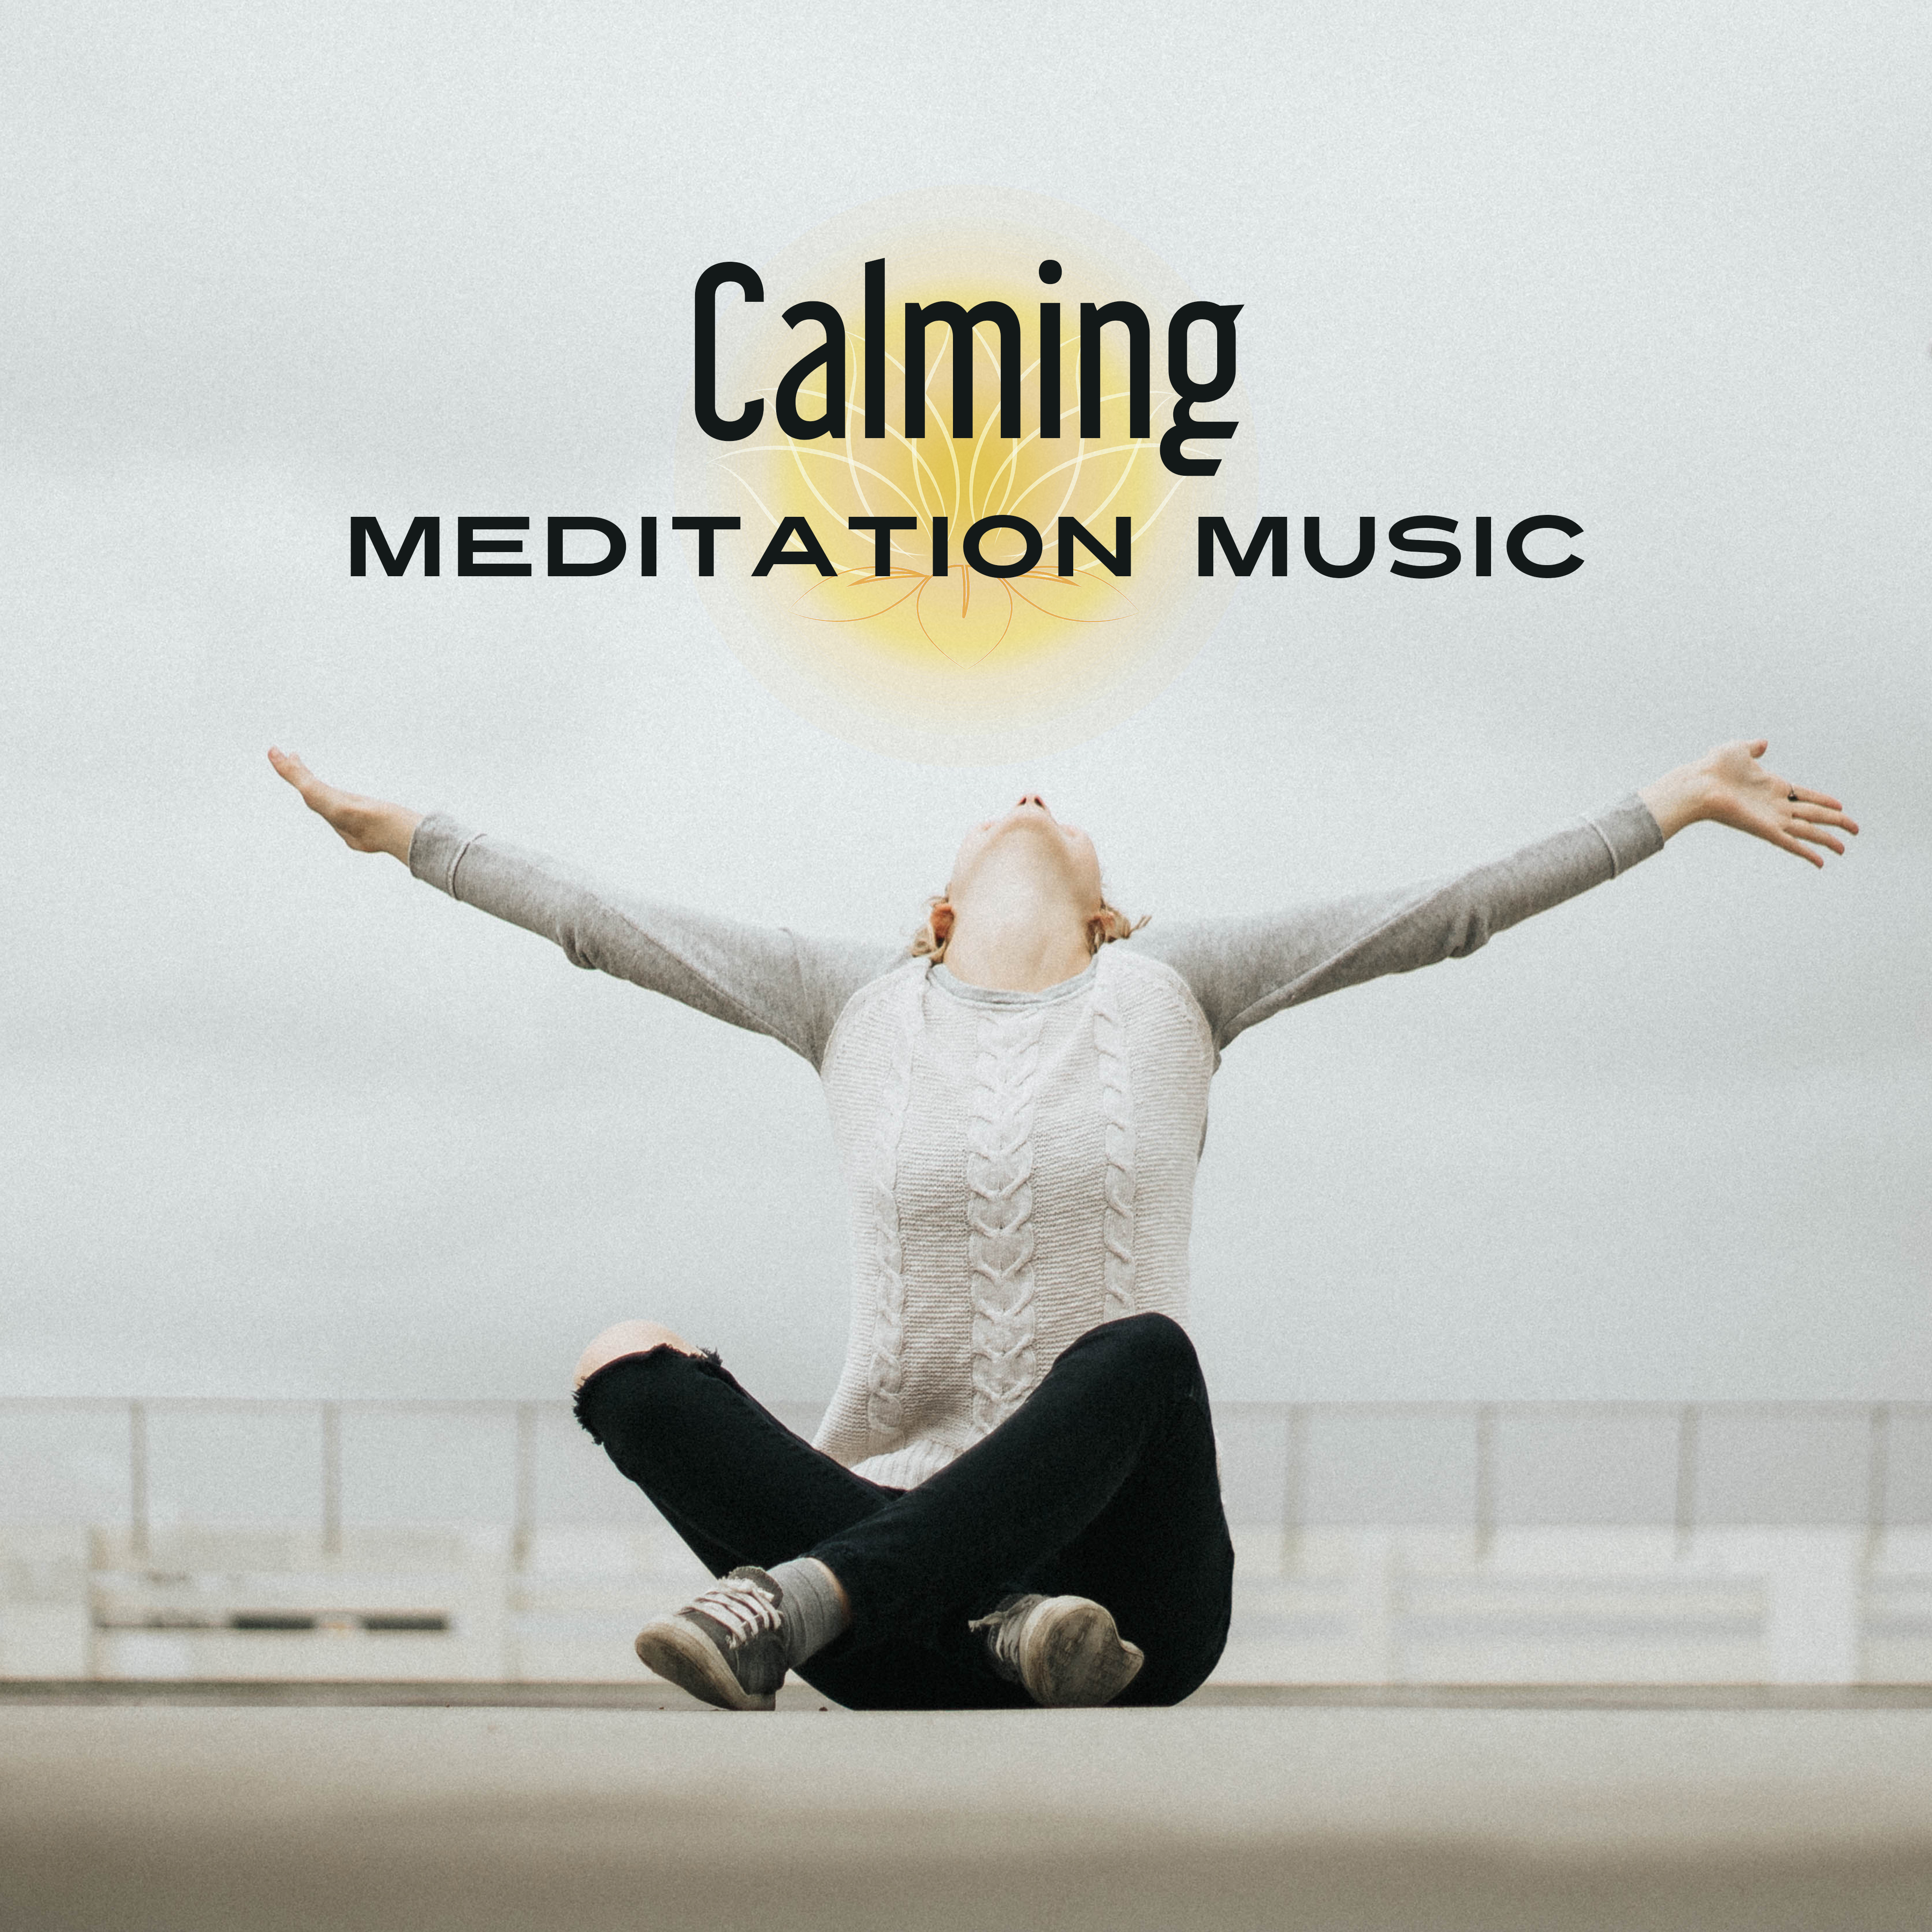 Calming Meditation Music  Soft New Age Music, Time to Meditate, Inner Peace, Mind Calmness